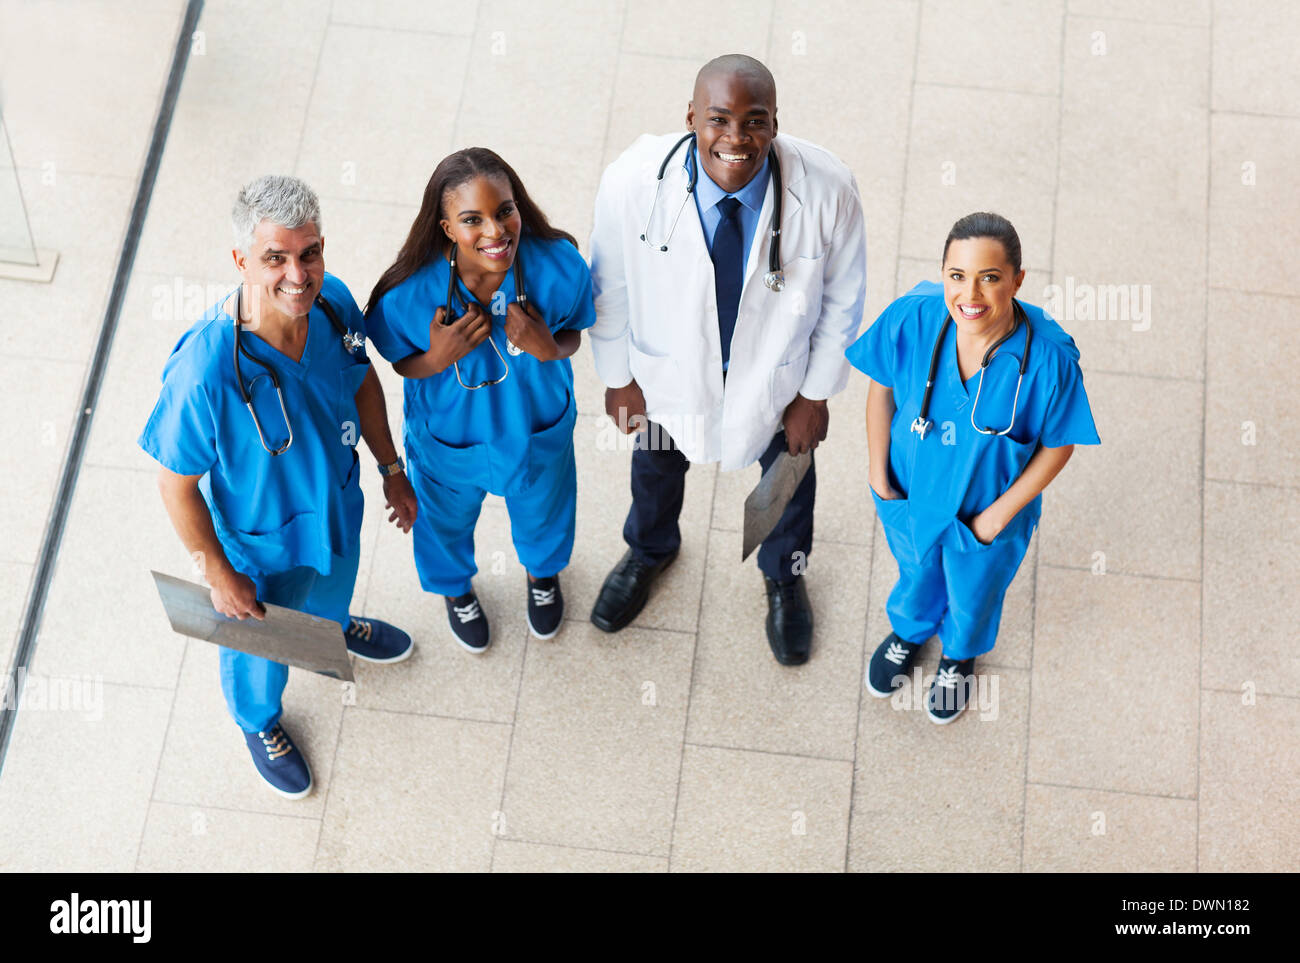 overhead view of group healthcare workers looking up Stock Photo